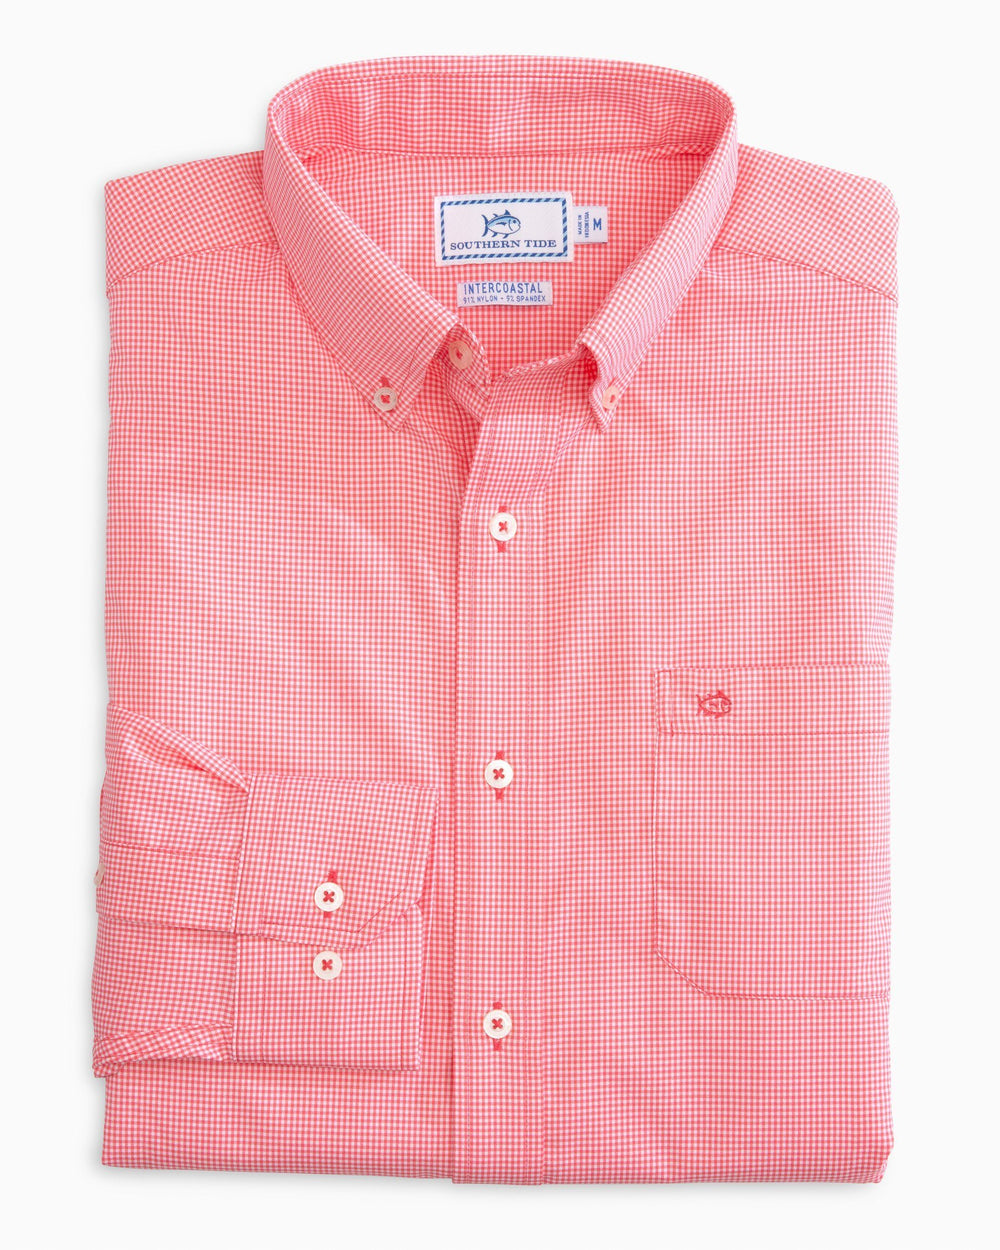 The front view of the Men's Pink Micro Gingham Intercoastal Performance Sport Shirt by Southern Tide - Sunkist Coral